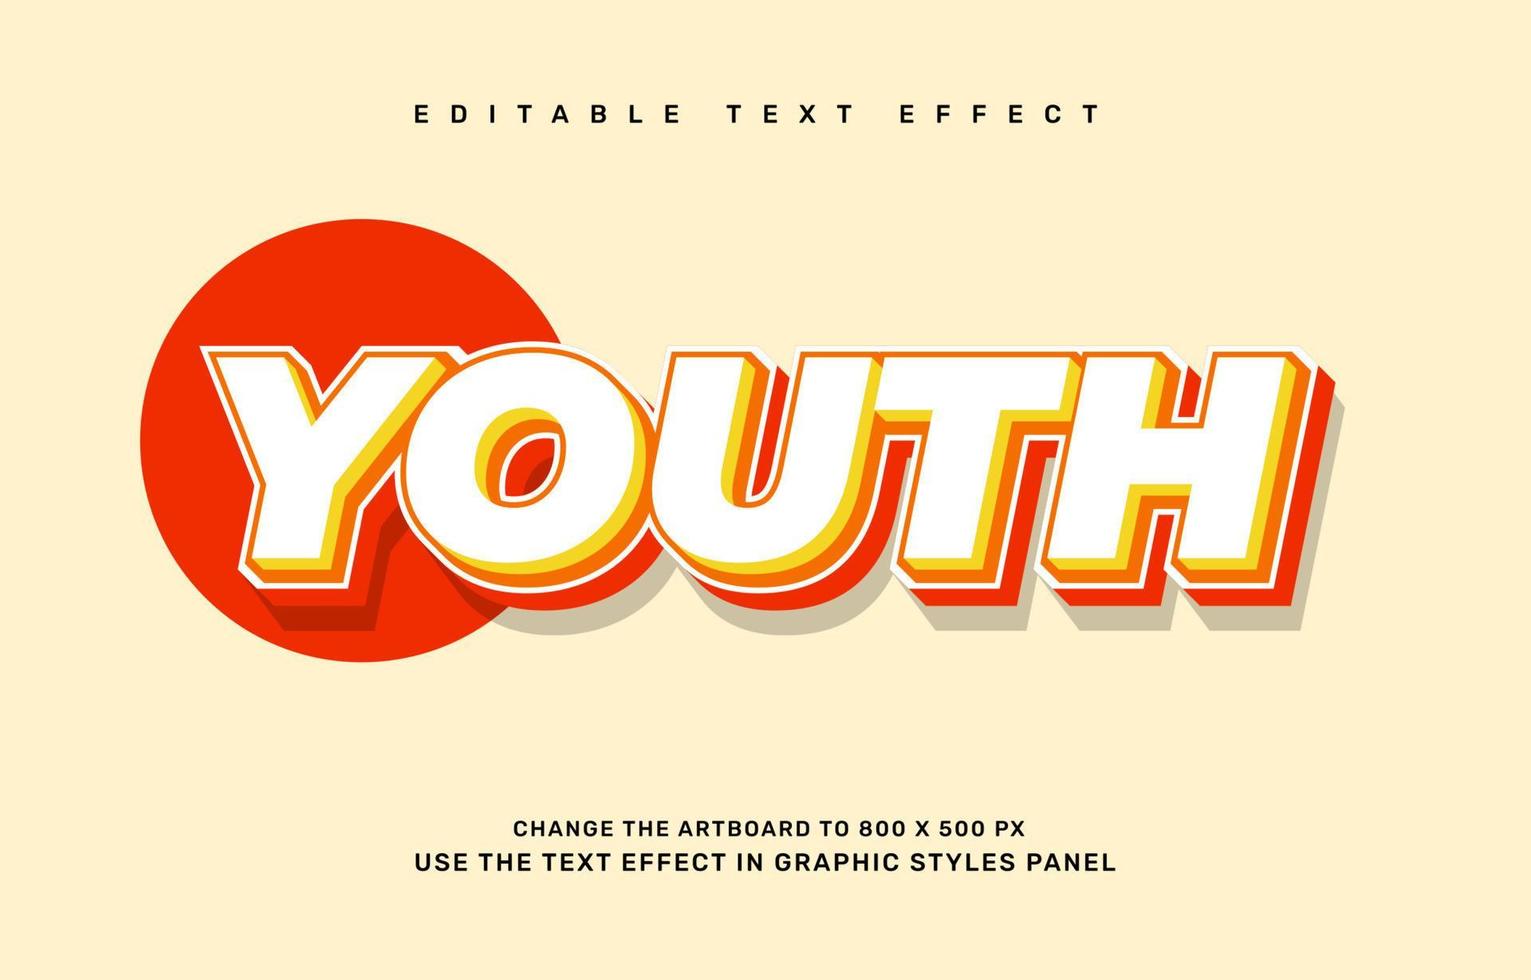 Groovy youth editable text effect template vector